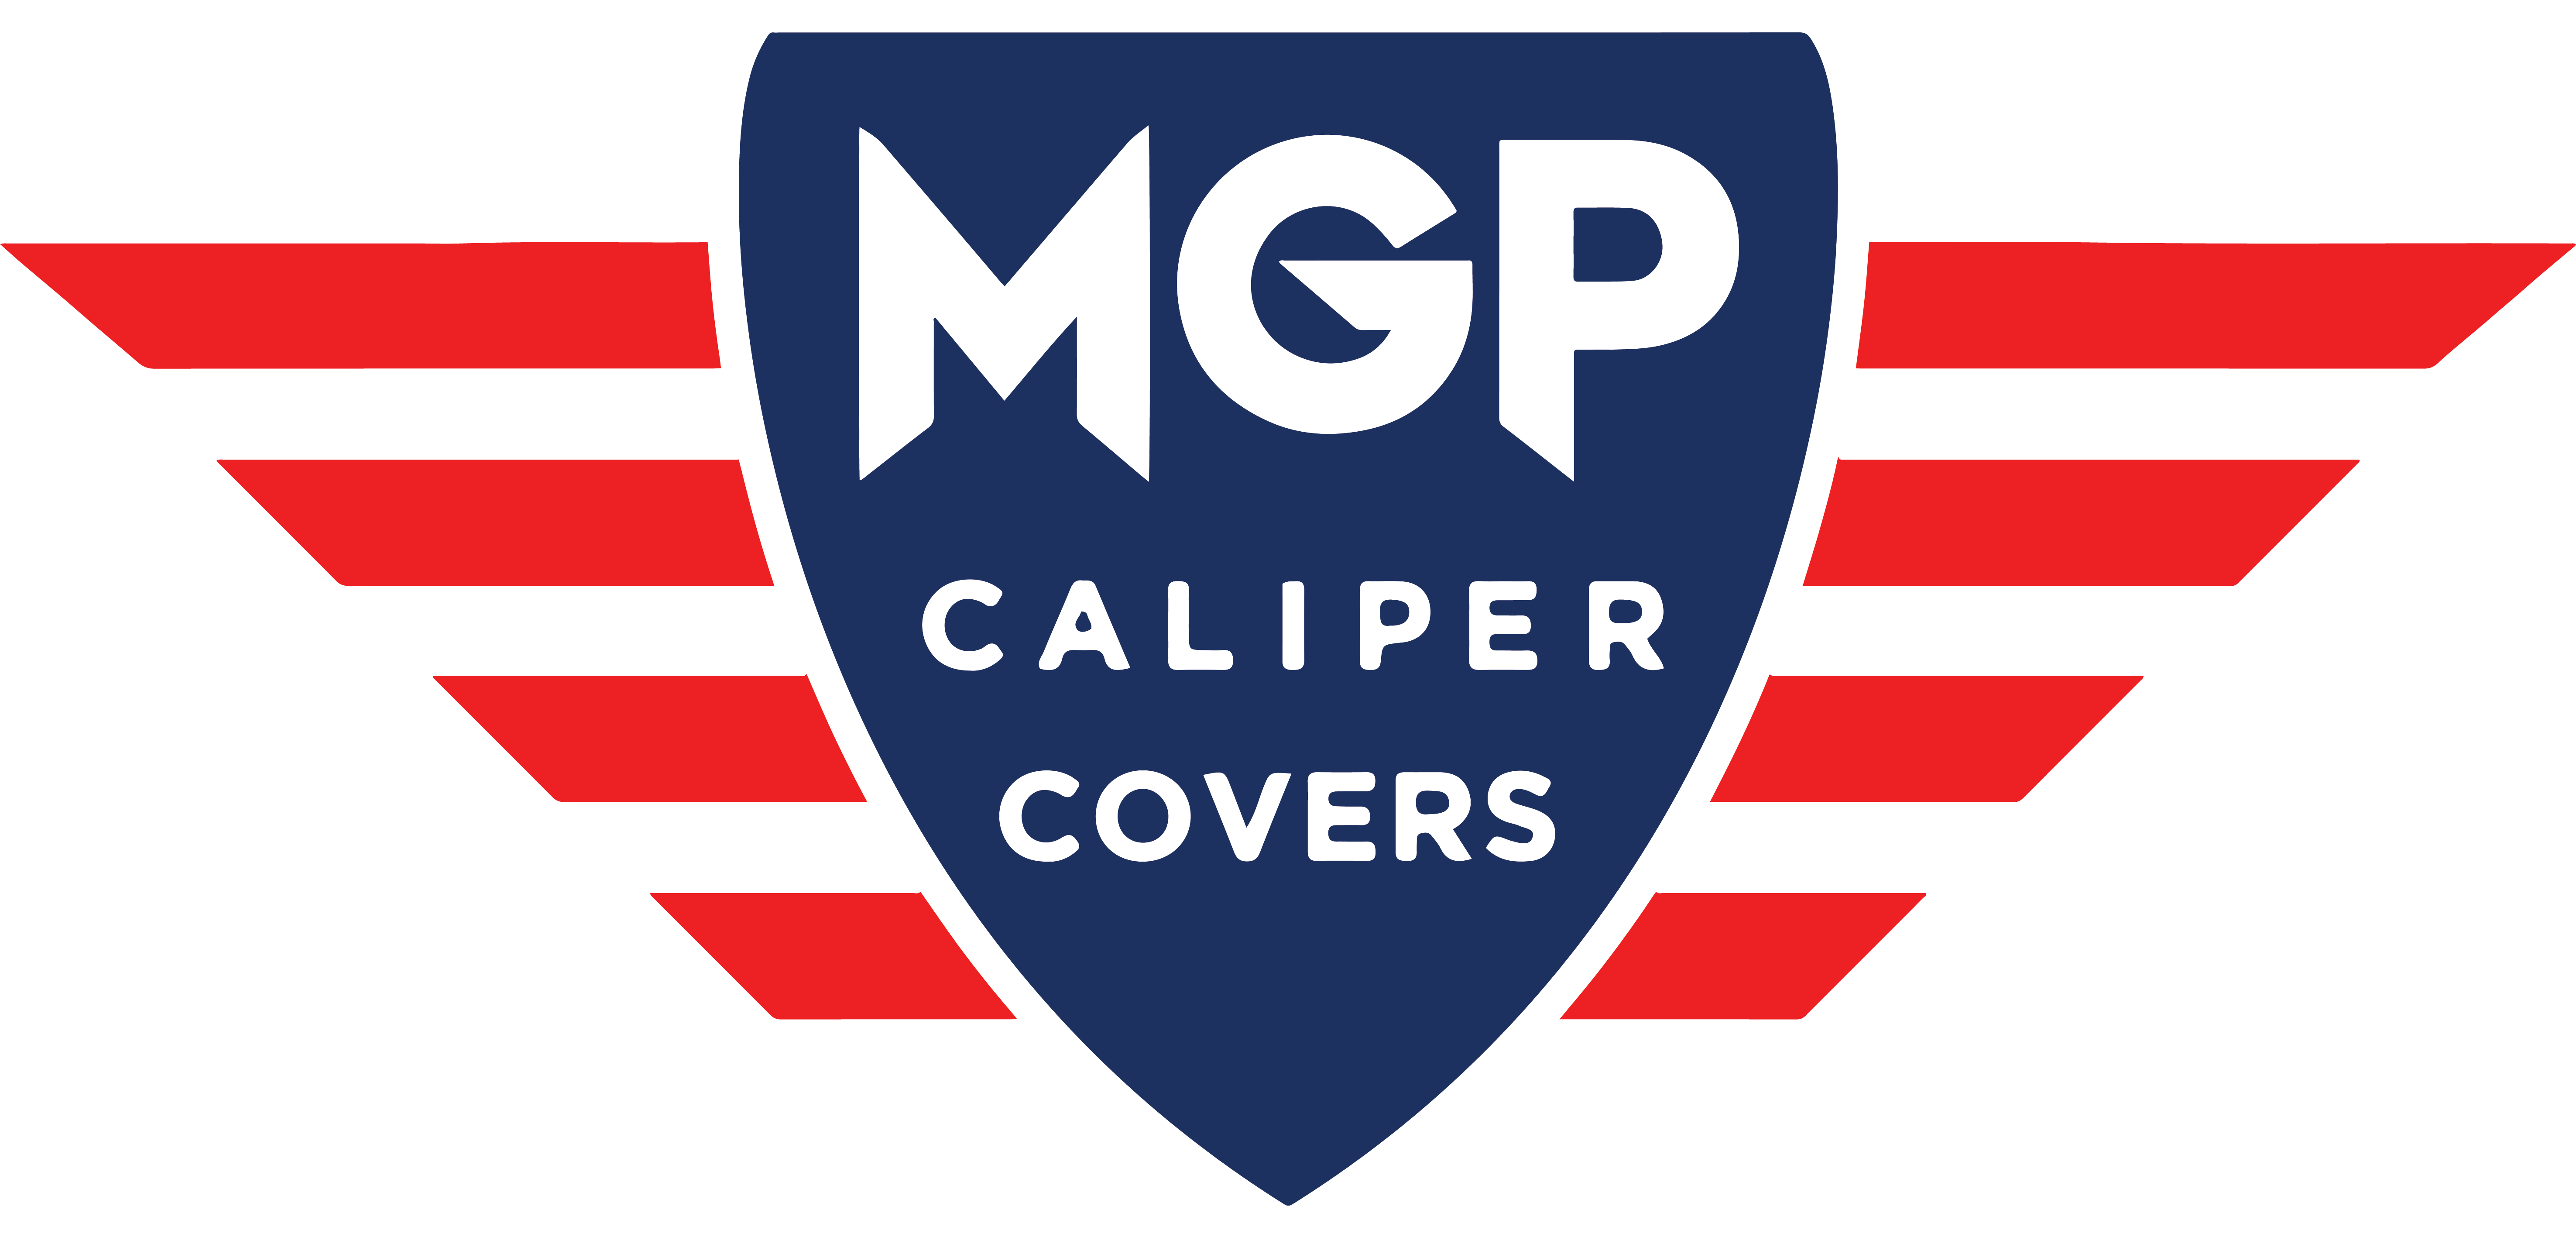 MGP Caliper Covers 12192SRT1RD RT Engraved Caliper Cover with Red Powder Coat Finish and Silver Characters, Set of 4 